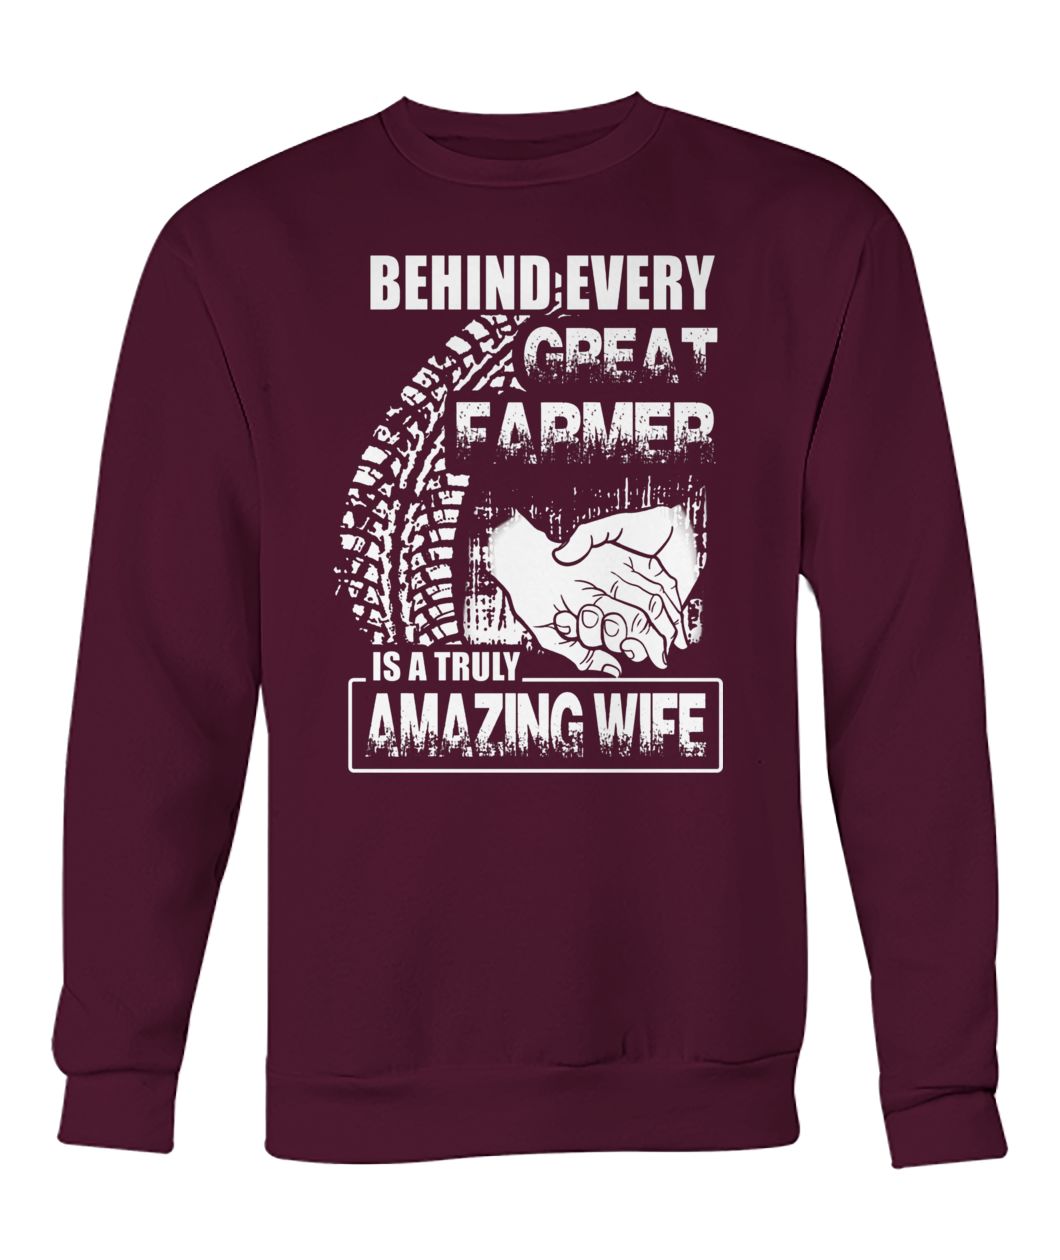 Behind every great farmer is a truly amazing wife crew neck sweatshirt